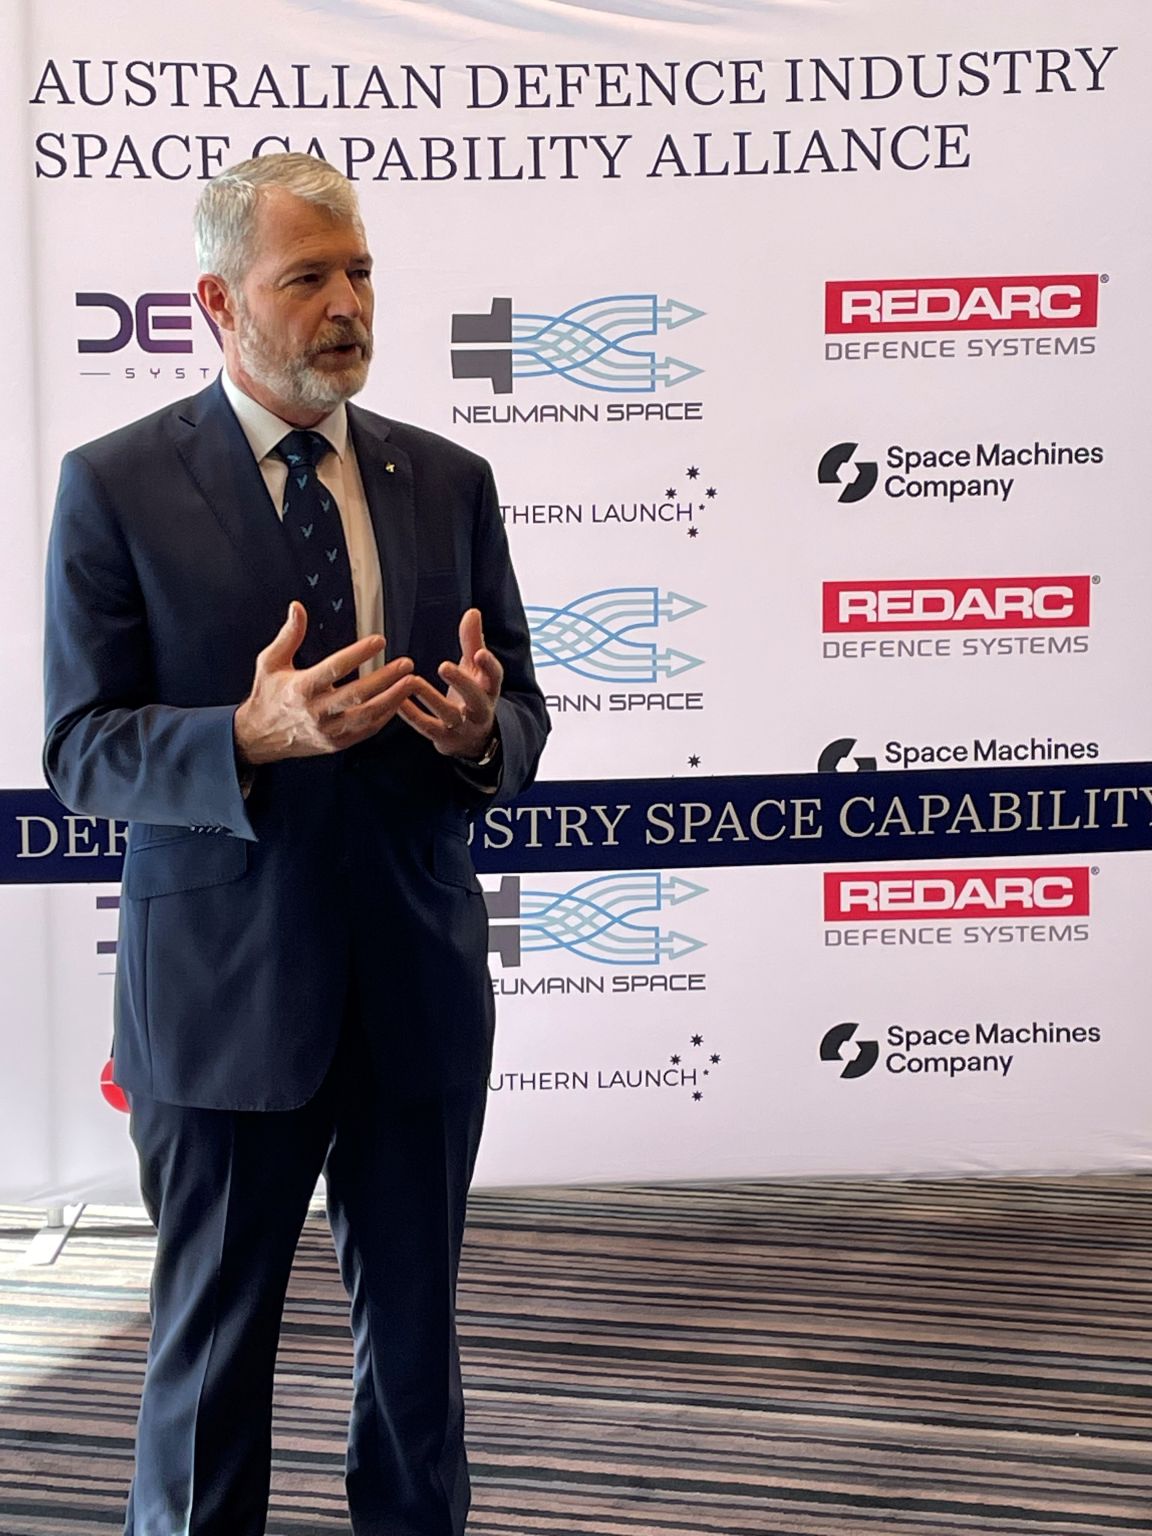 Speaker in front of the Australian Defence Industry Space Capability Alliance banner at the 13th Australian Space Forum